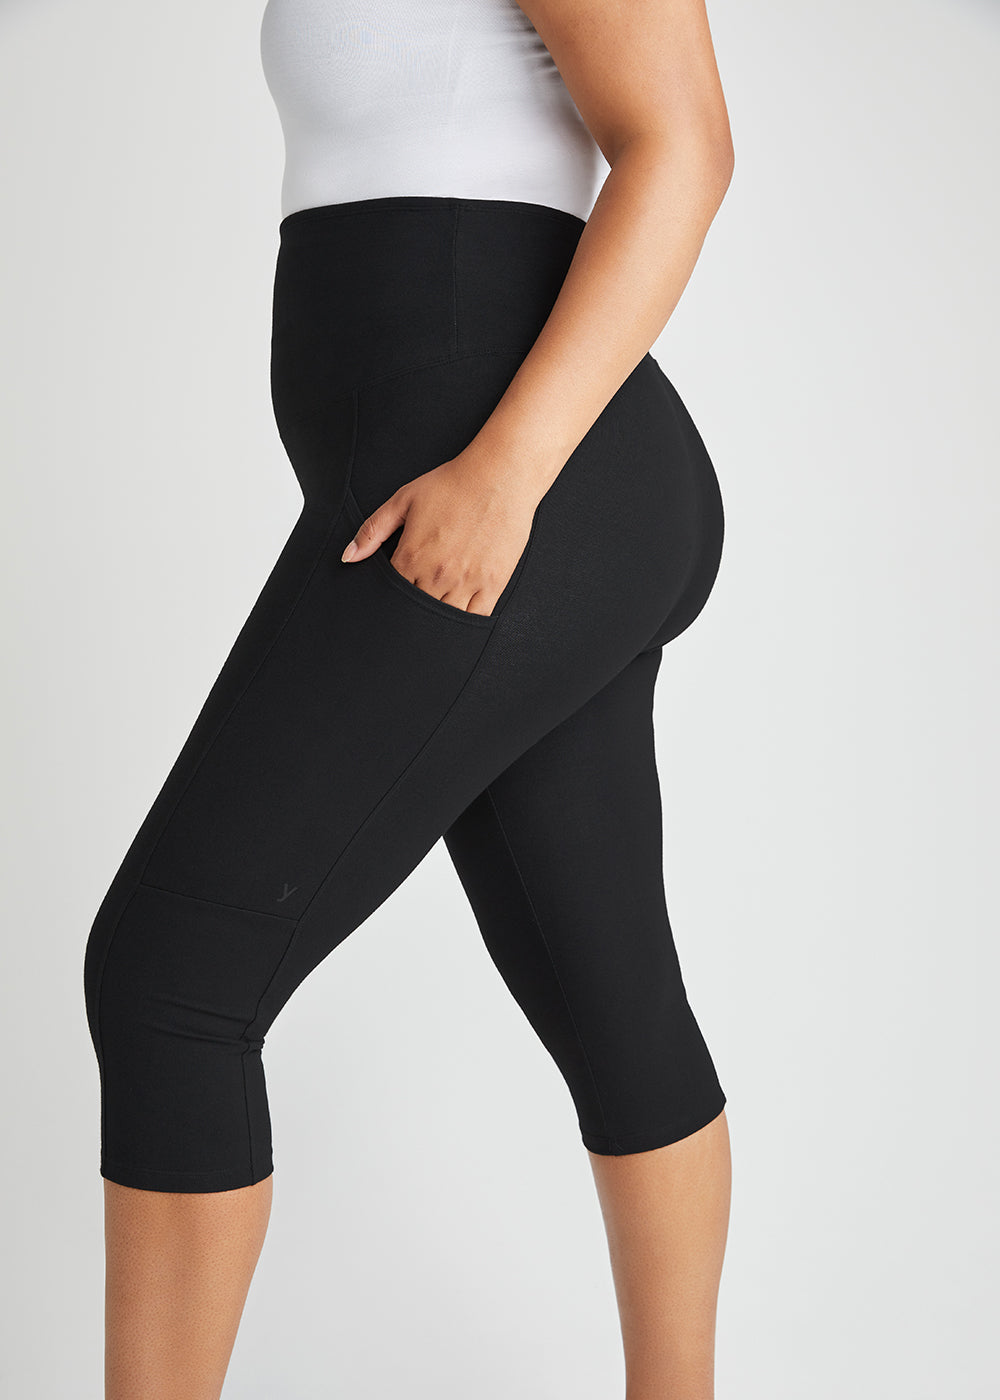 Talia Cropped Capri Shaping Legging with Pockets - Cotton Stretch